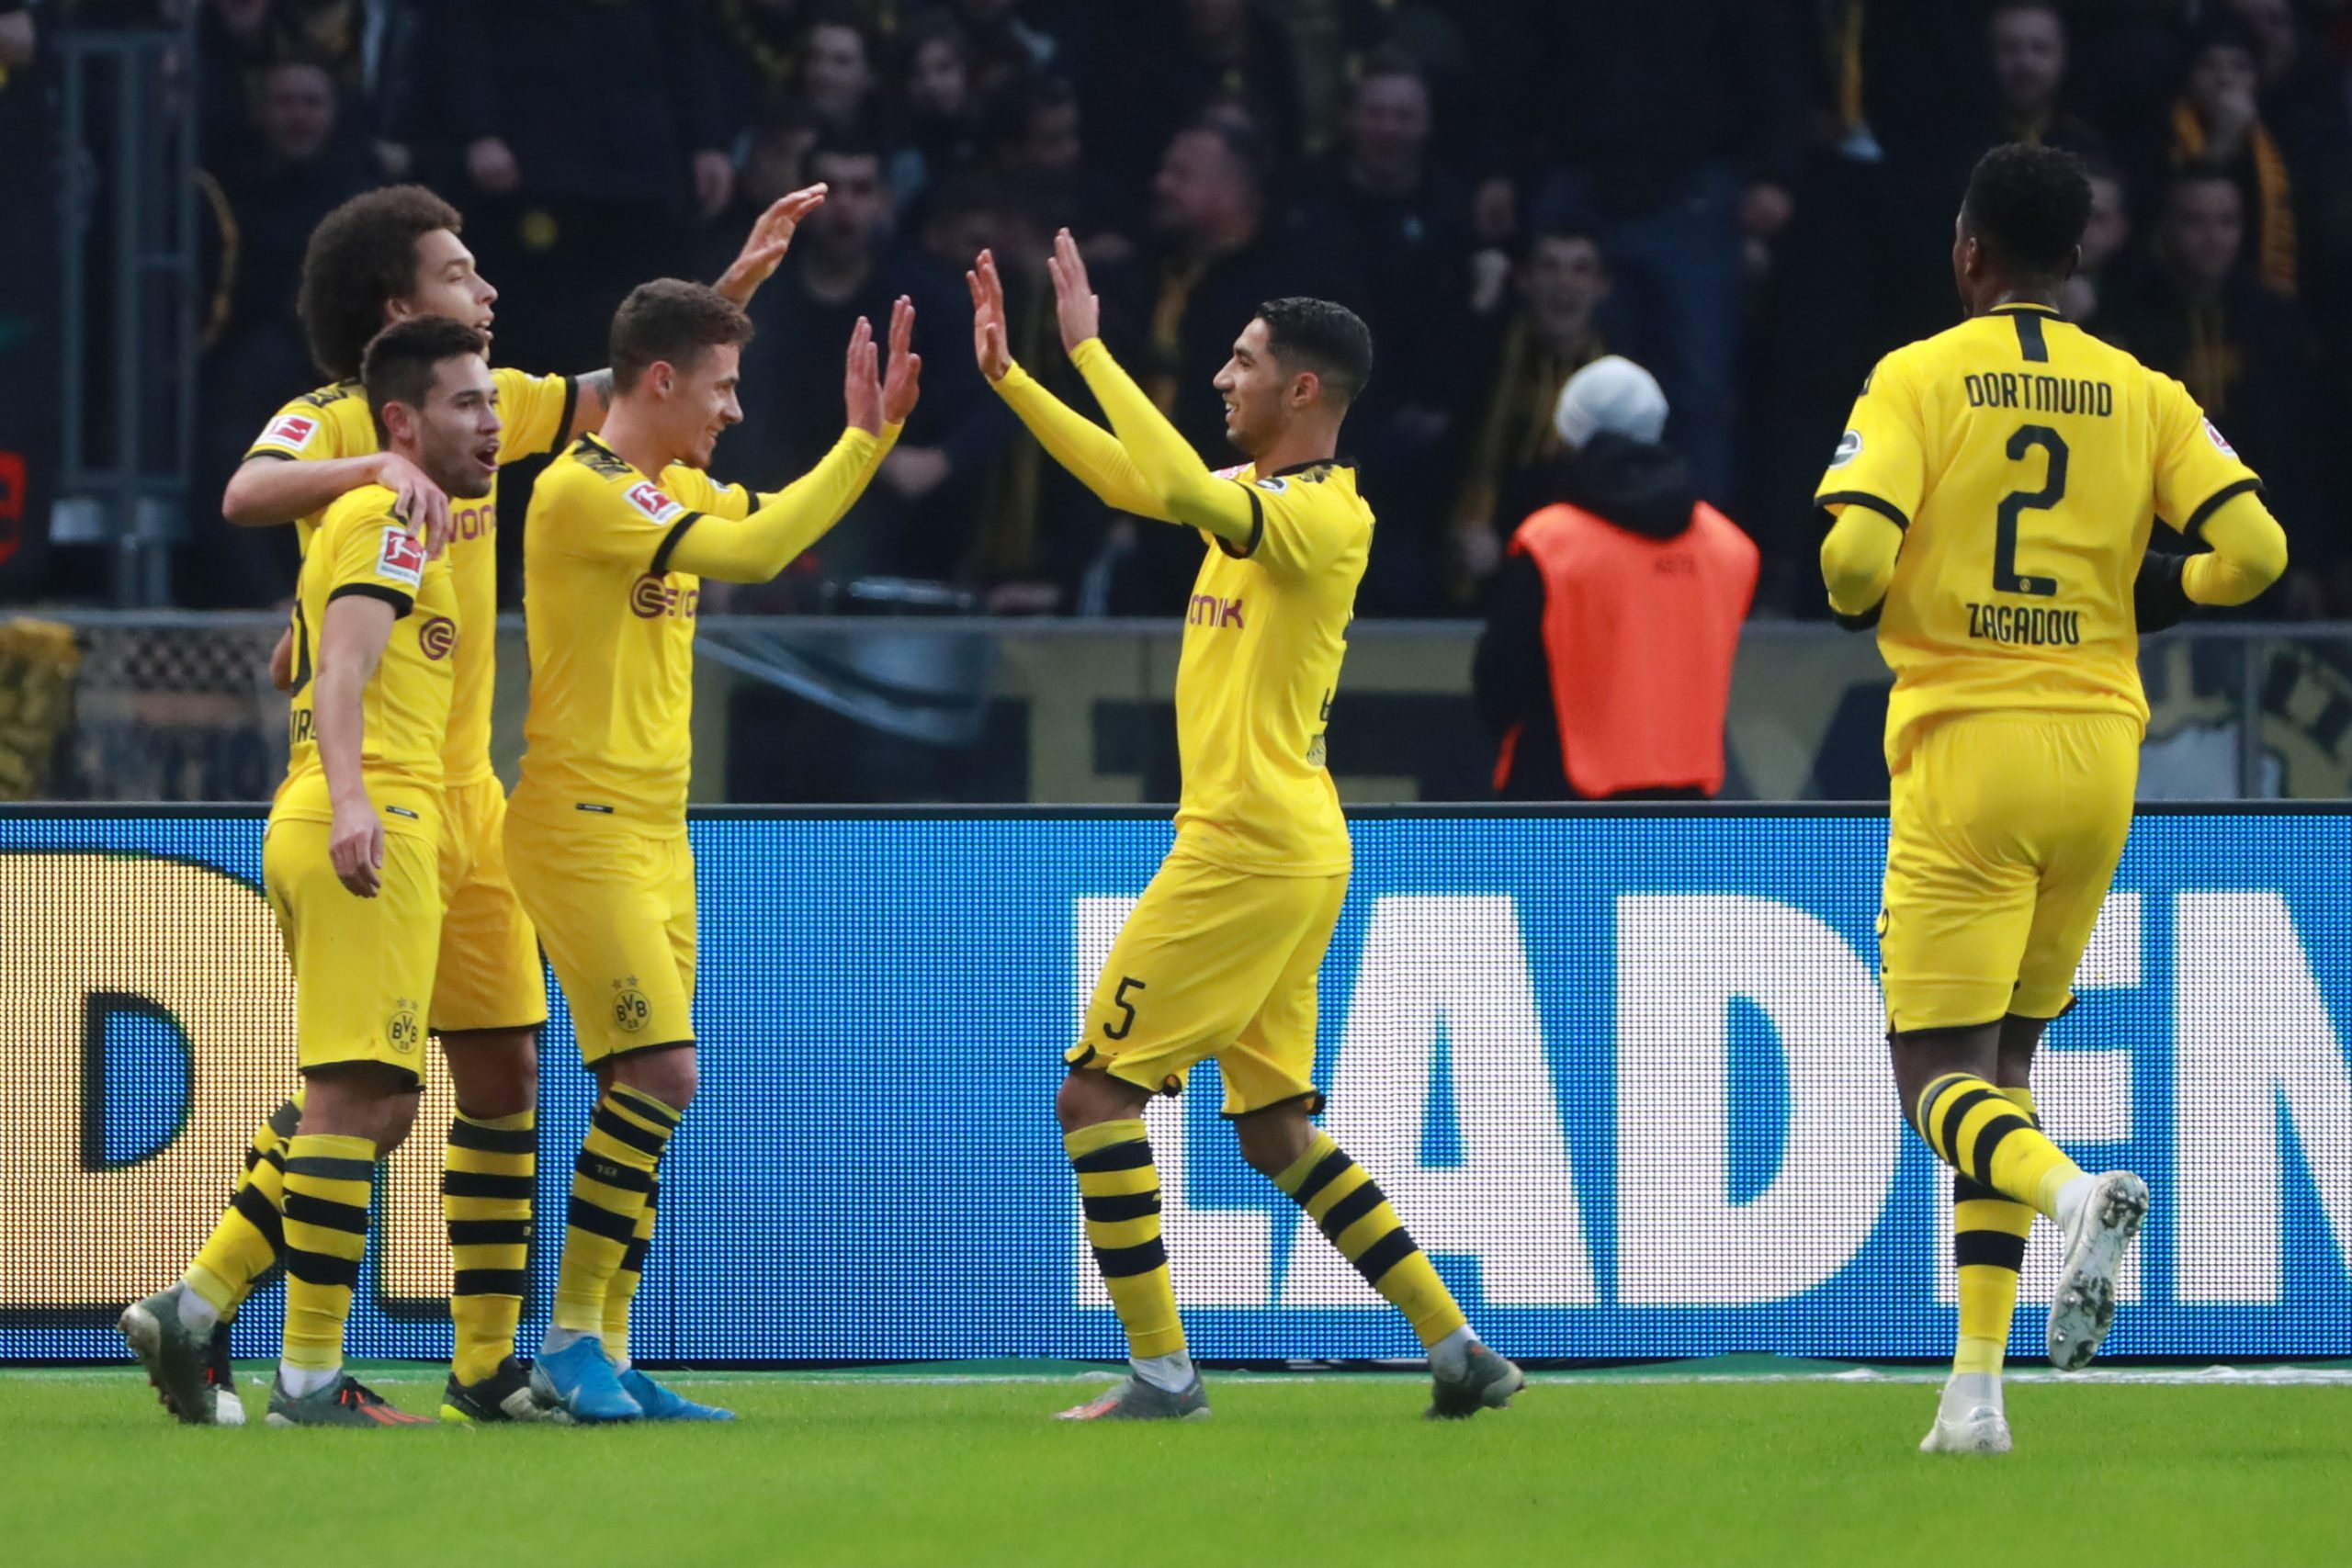 epa08035101 Dortmund's Thorgan Hazard (C) celebrates after scoring the 0:2 during the German Bundesliga soccer match between Hertha BSC and Borussia Dortmund in Berlin, Germany, 30 November 2019.  EPA/HAYOUNG JEON CONDITIONS - ATTENTION: The DFL regulations prohibit any use of photographs as image sequences and/or quasi-video.